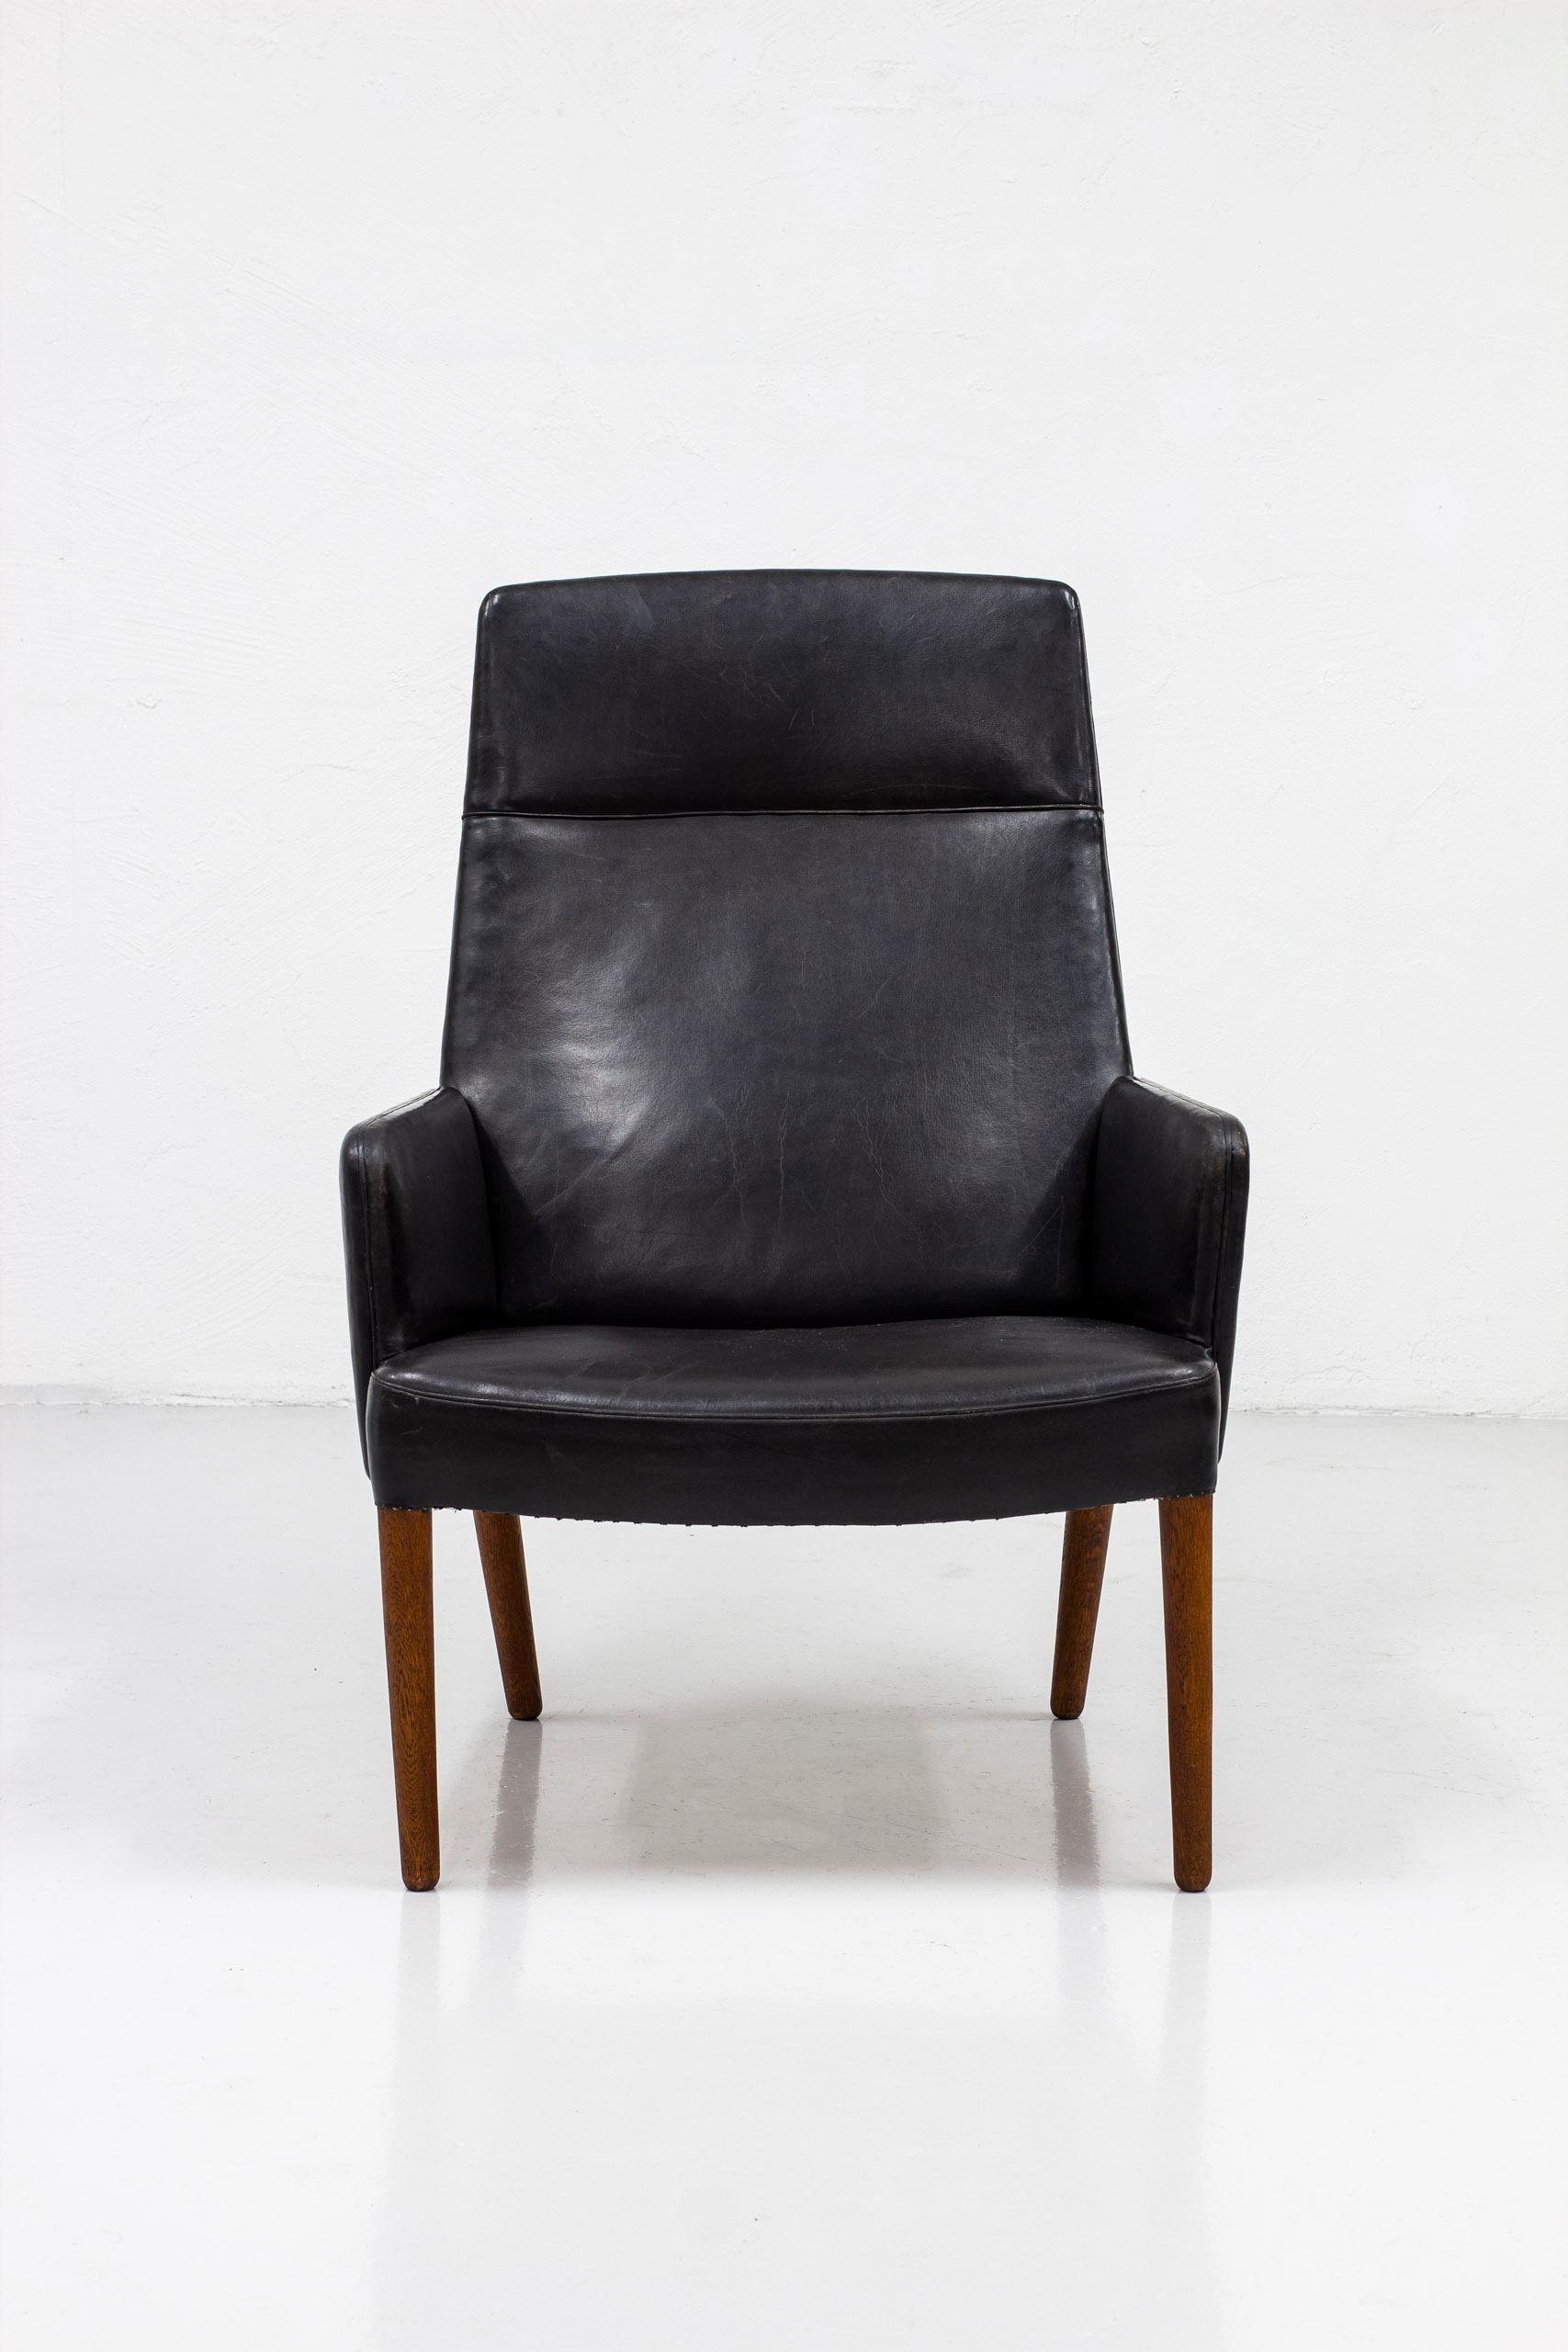 High back lounge chair designed by Danish designer duo Ejnar Larsen & Aksel Bender Madsen. Produced by Aarhus furniture factory in Denmark during the 1950s. Exquisitely hand made original leather work in a beautifully patinated black leather. This